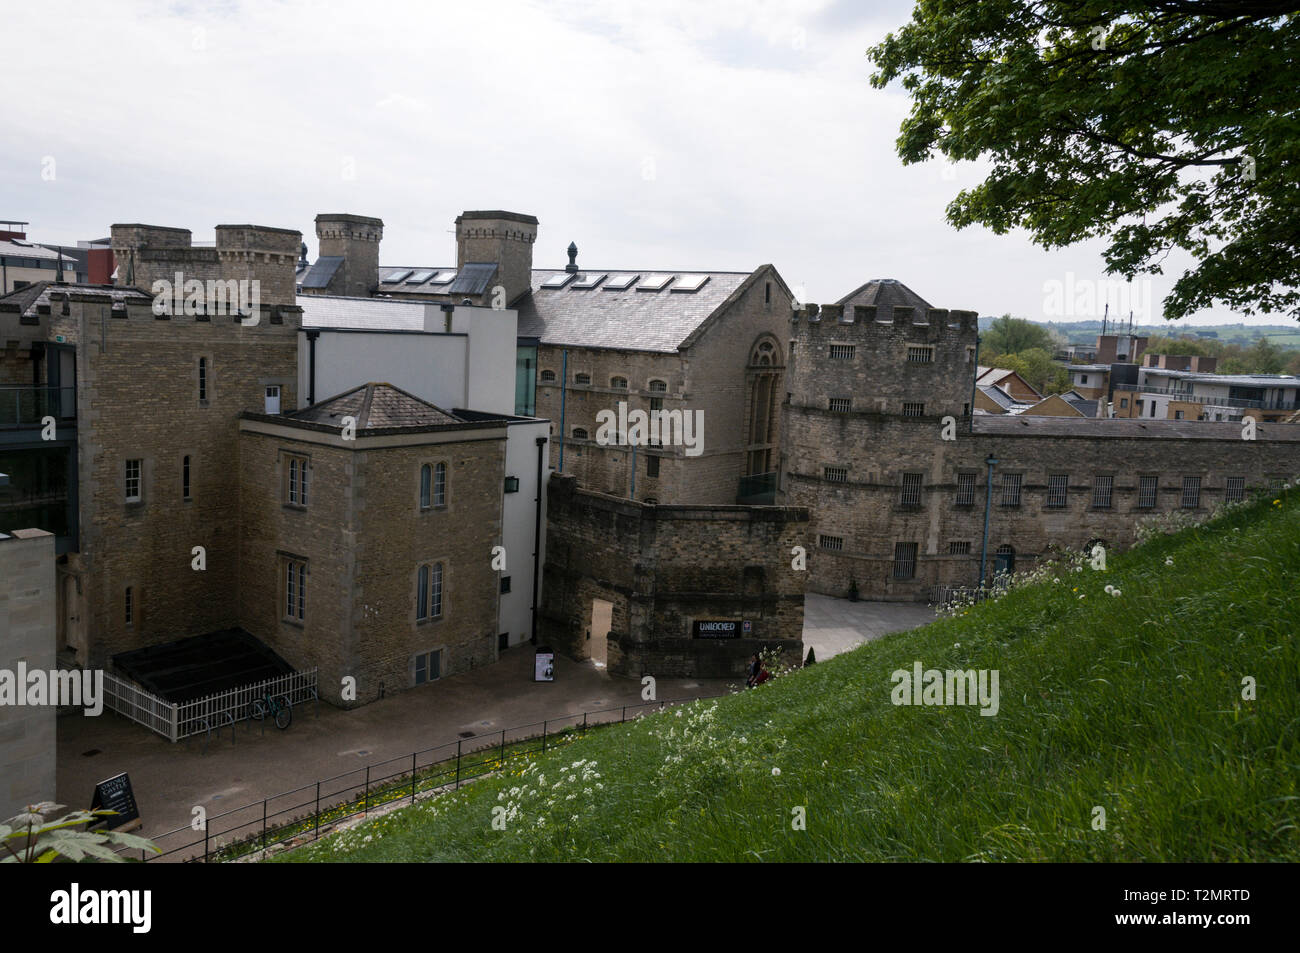 Oxford Castle and prison is located in the centre of Oxford, Britain  The 12th or early 13th century medieval built castle was destroyed during the En Stock Photo